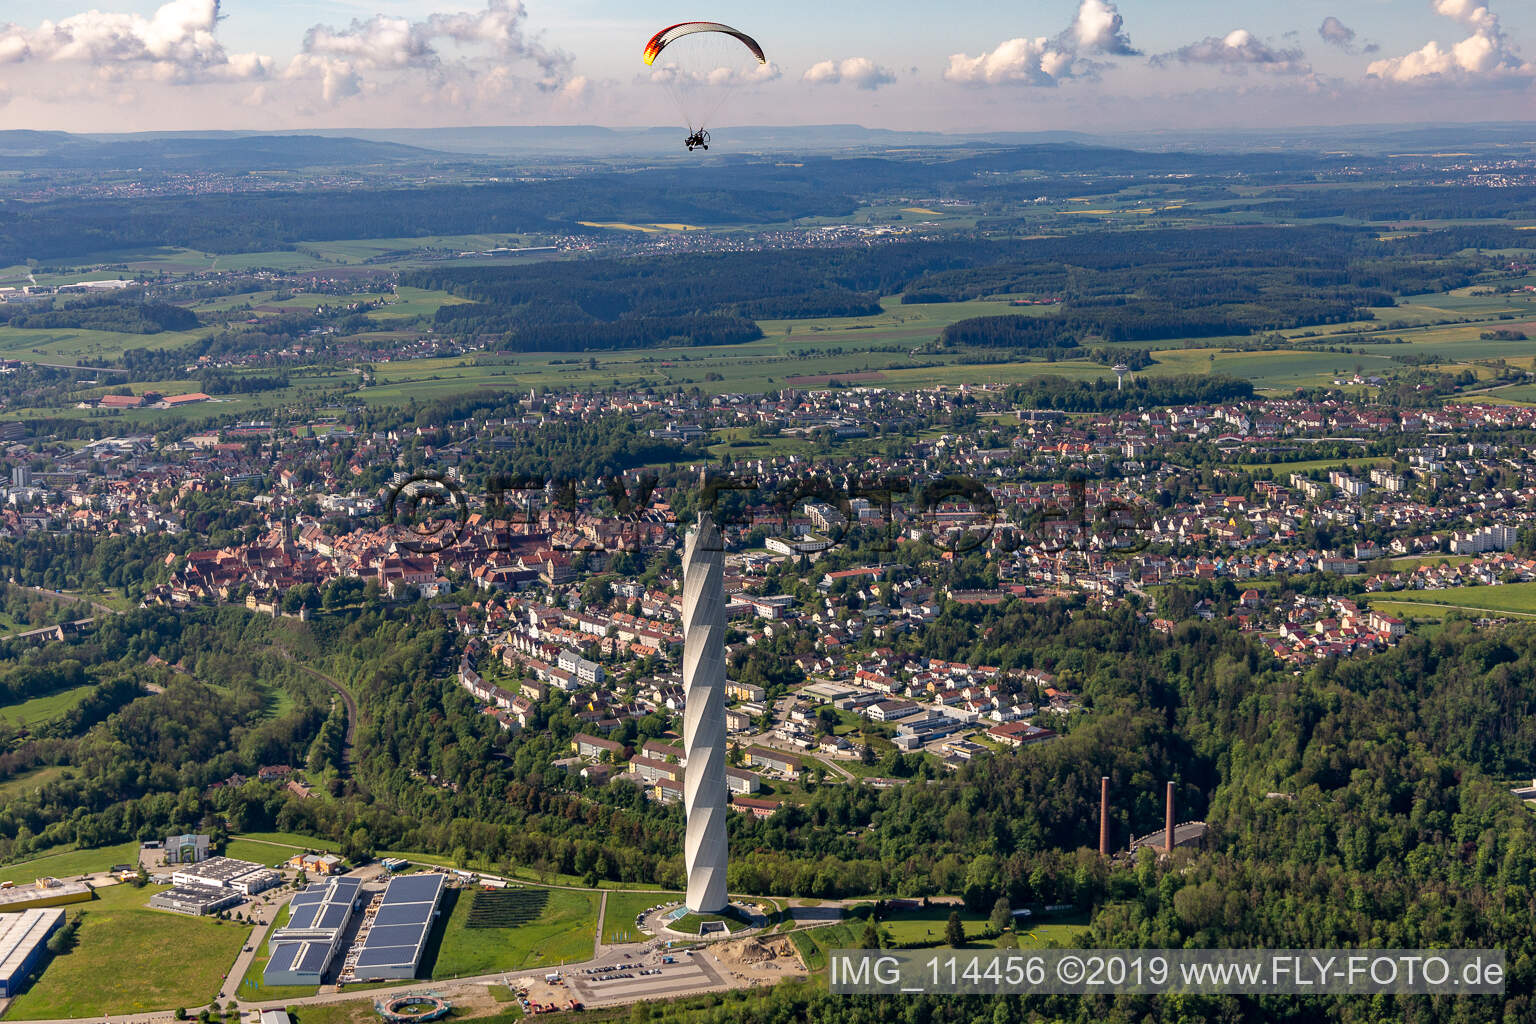 Aerial view of Site of the ThyssenKrupp testing tower for Speed elevators in Rottweil in Baden - Wuerttemberg. When finished the new landmark of the town of Rottweil will be the tallest structure in Baden-Wuerttemberg